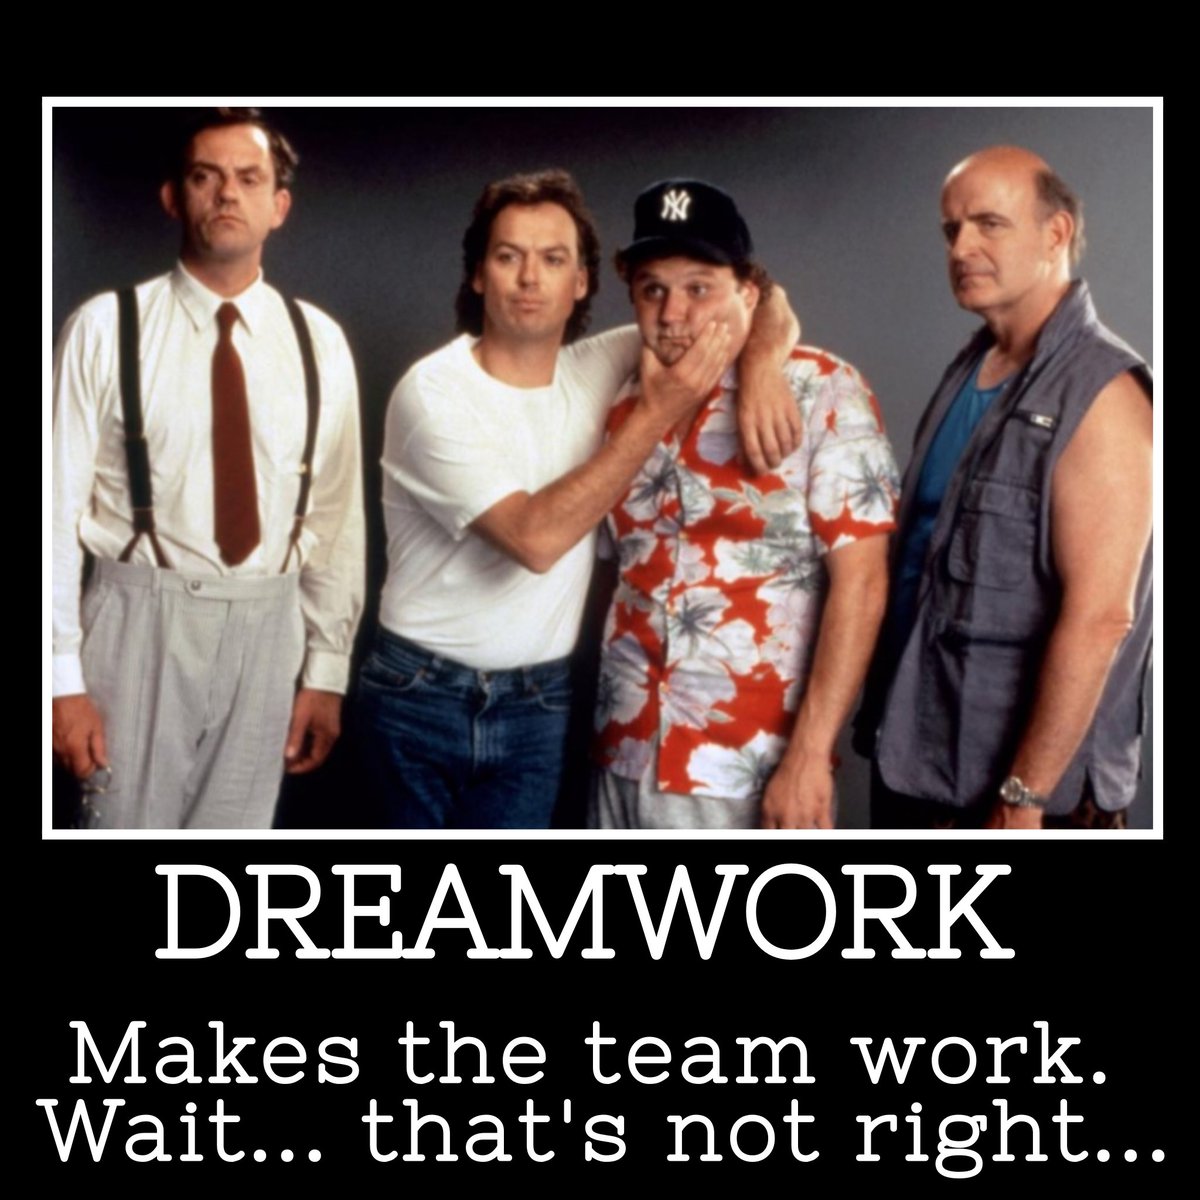 If you haven't downloaded our most recent #MarchMadness episode about #TheDreamTeam, what are you waiting for? Available now anywhere Pods are cast!

#MichaelKeaton #ChristopherLloyd #StephenFurst #PeterBoyle #DennisBoutsikaris #LorraineBracco #JamesRemar #PhilipBosco #MiloOShea